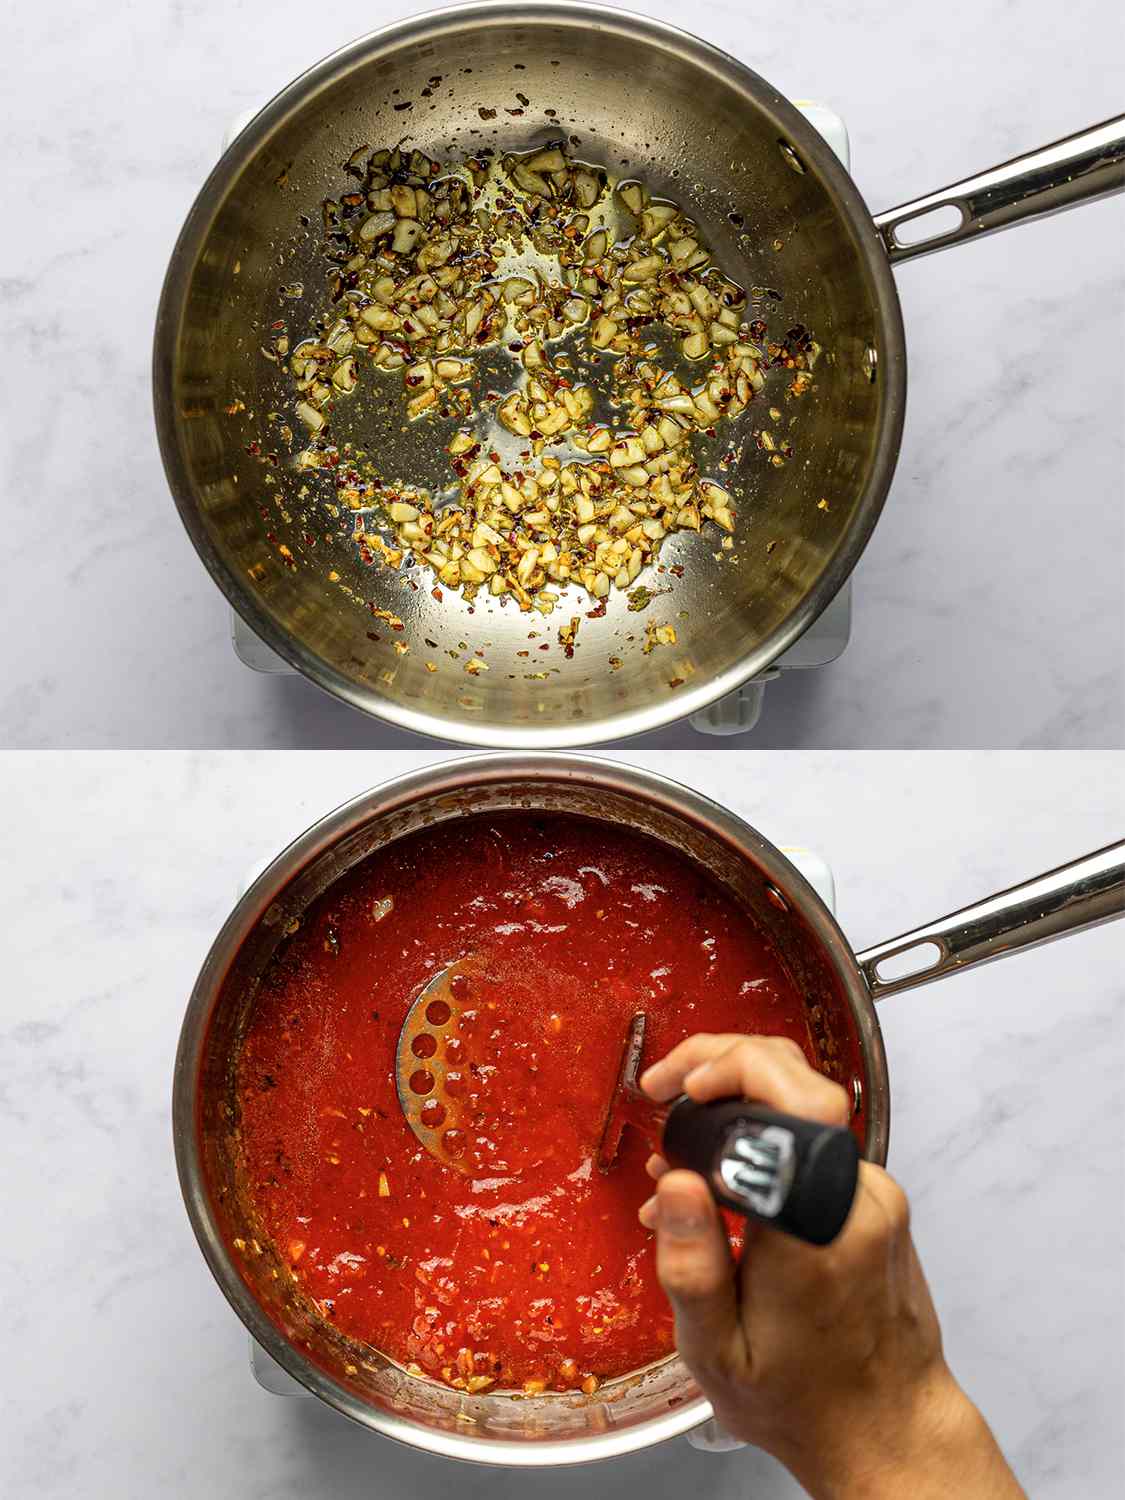 A two-image collage. The top image shows garlic, oregano, and red pepper flakes in a large saucepan once theyâre cooked in the oil and the garlic is softened. The bottom image shows tomatoes added to the same saucepan, being broken up with a potato masher held by a hand.